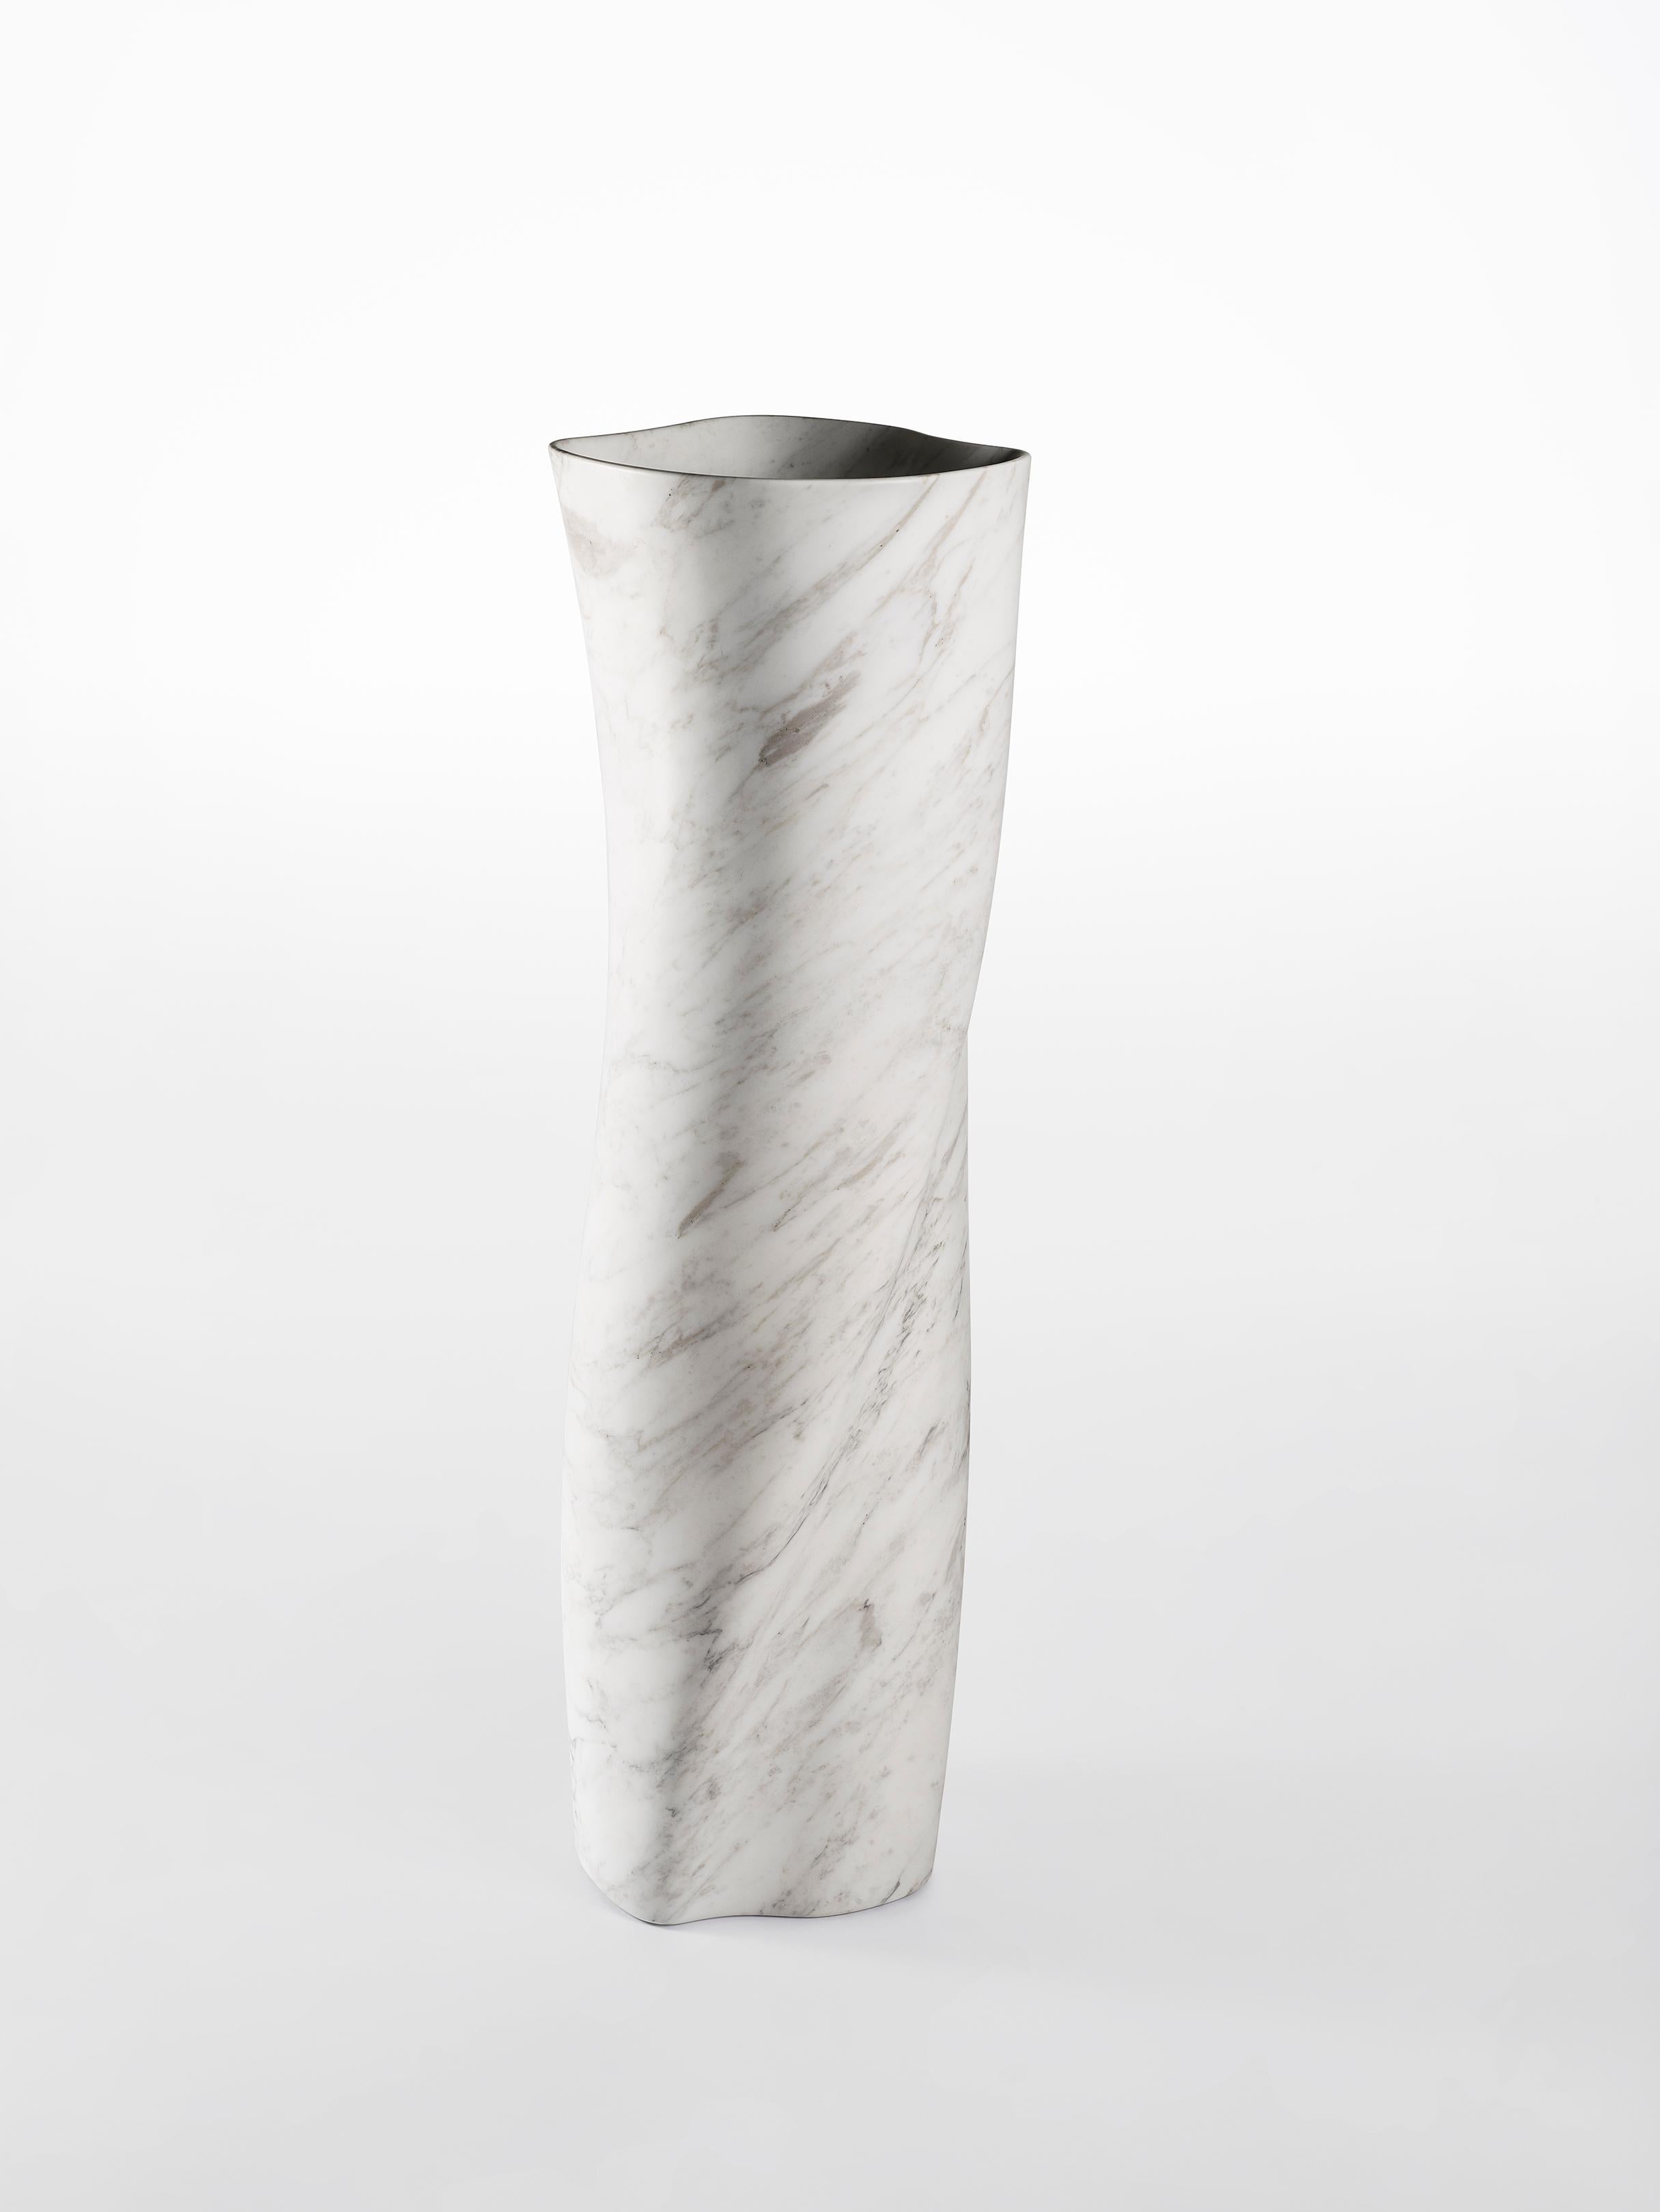 Vase III by Jonathan Hansen
12 Edition + 1 AP
Dimensions: 38.4 x 37 x 122 cm
Materials: Calacatta marble


Series I Captum Biomorfe is a group of nine sculpture works created by New York artist Jonathan Hansen. Captum is a seized or captured